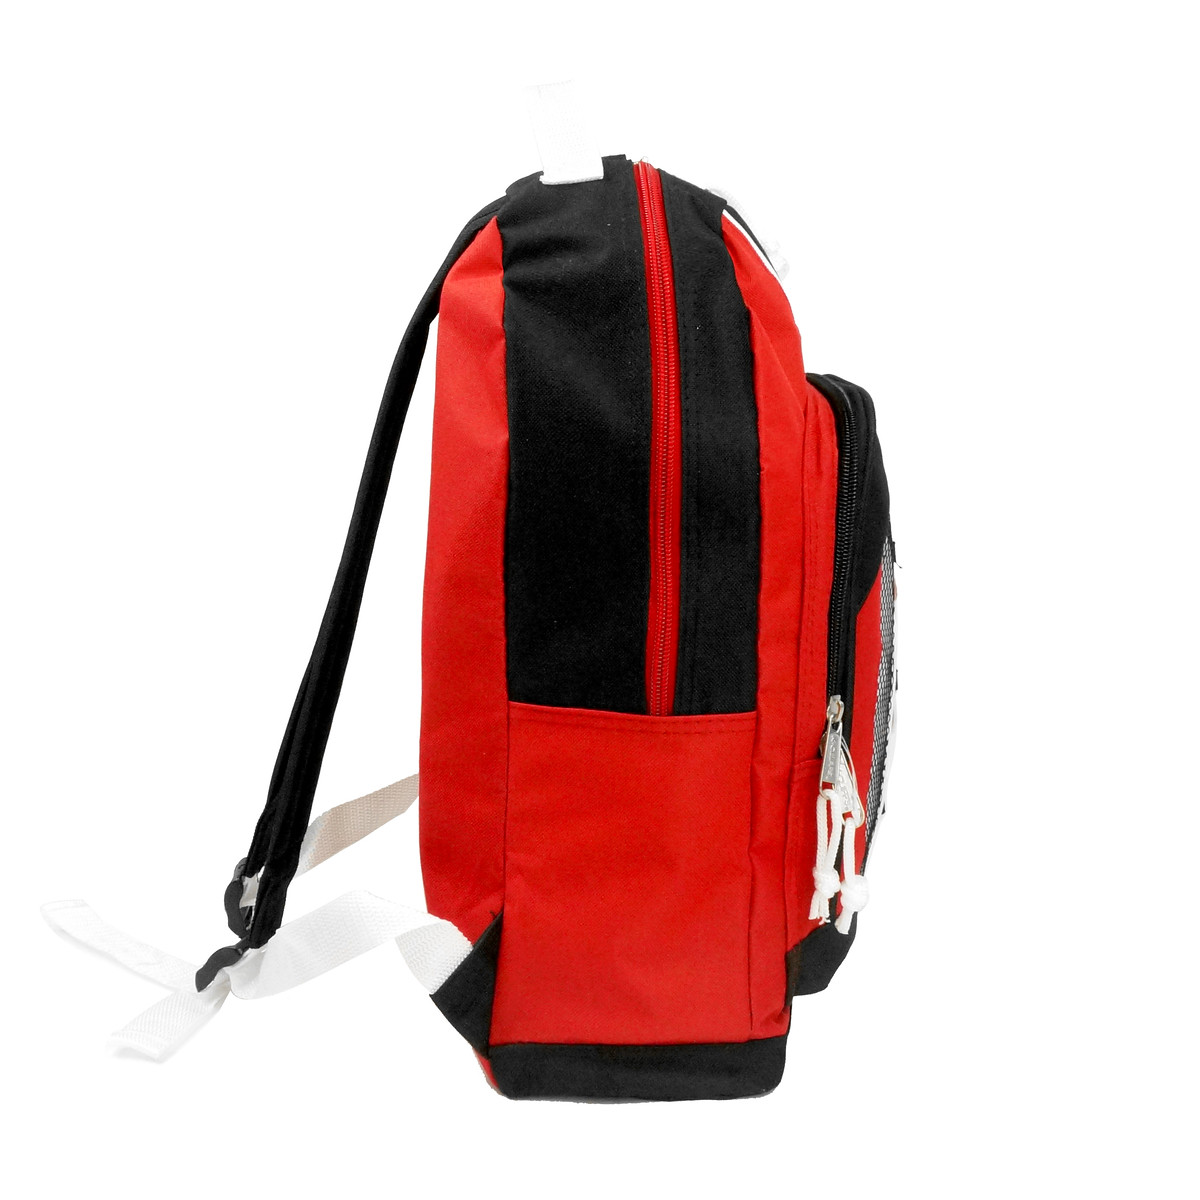 K-Cliffs 15" Lightweight Backpack, Daypack Bungee Water Resistant for Travel School and College, Unisex Color for Casual Everyday Kids & Teens (Red) - image 4 of 7